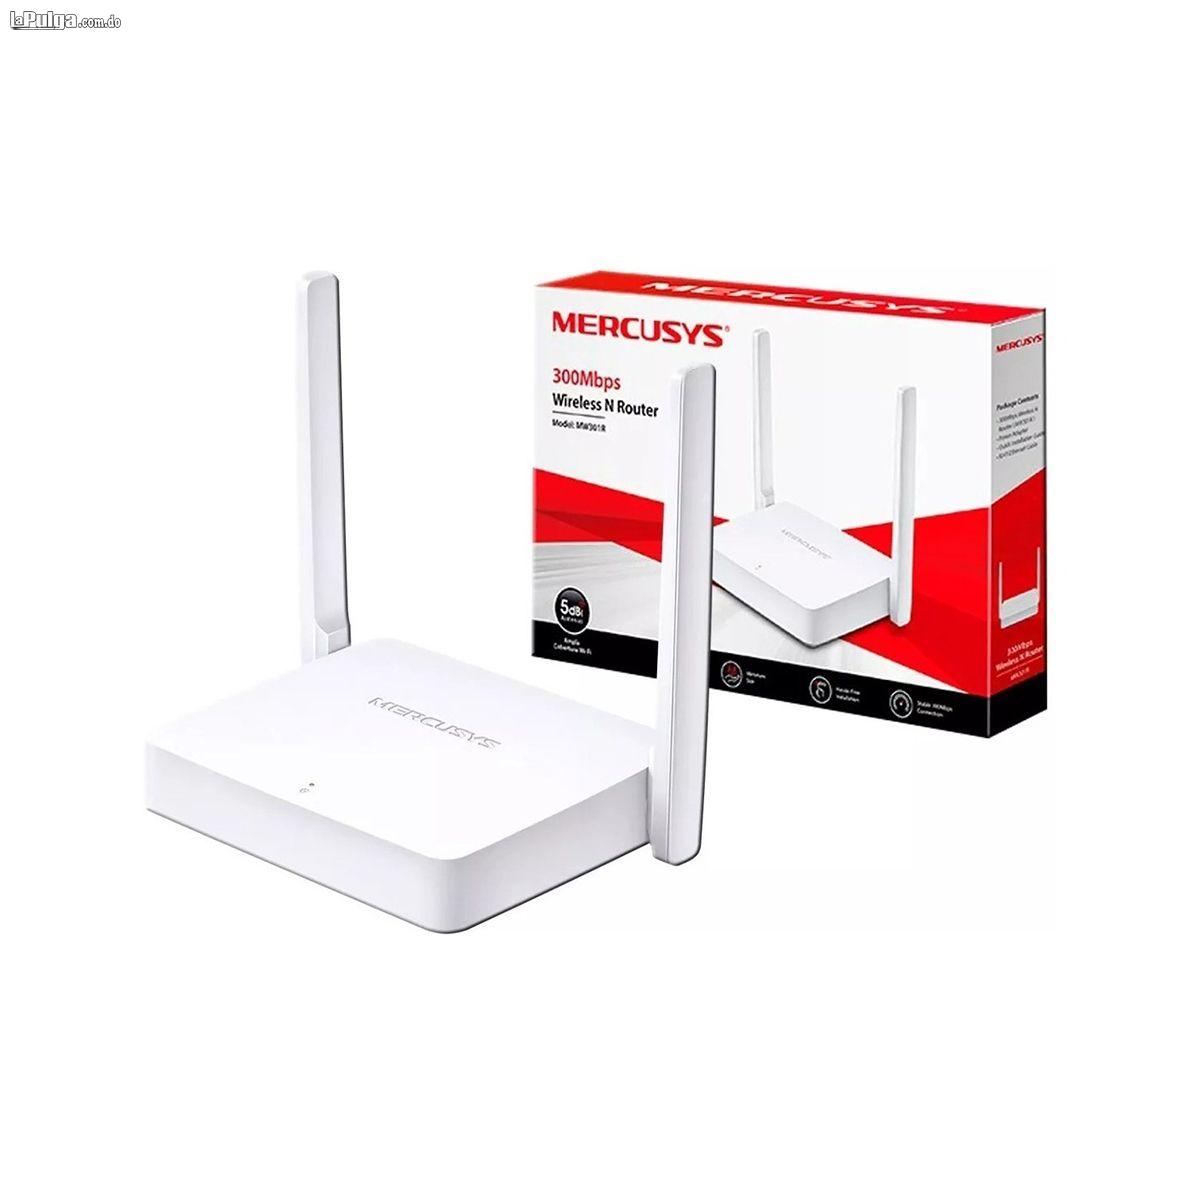 ROUTER INALAMBRICO MERCUSYS 302MBPS MW301R Foto 6952890-1.jpg